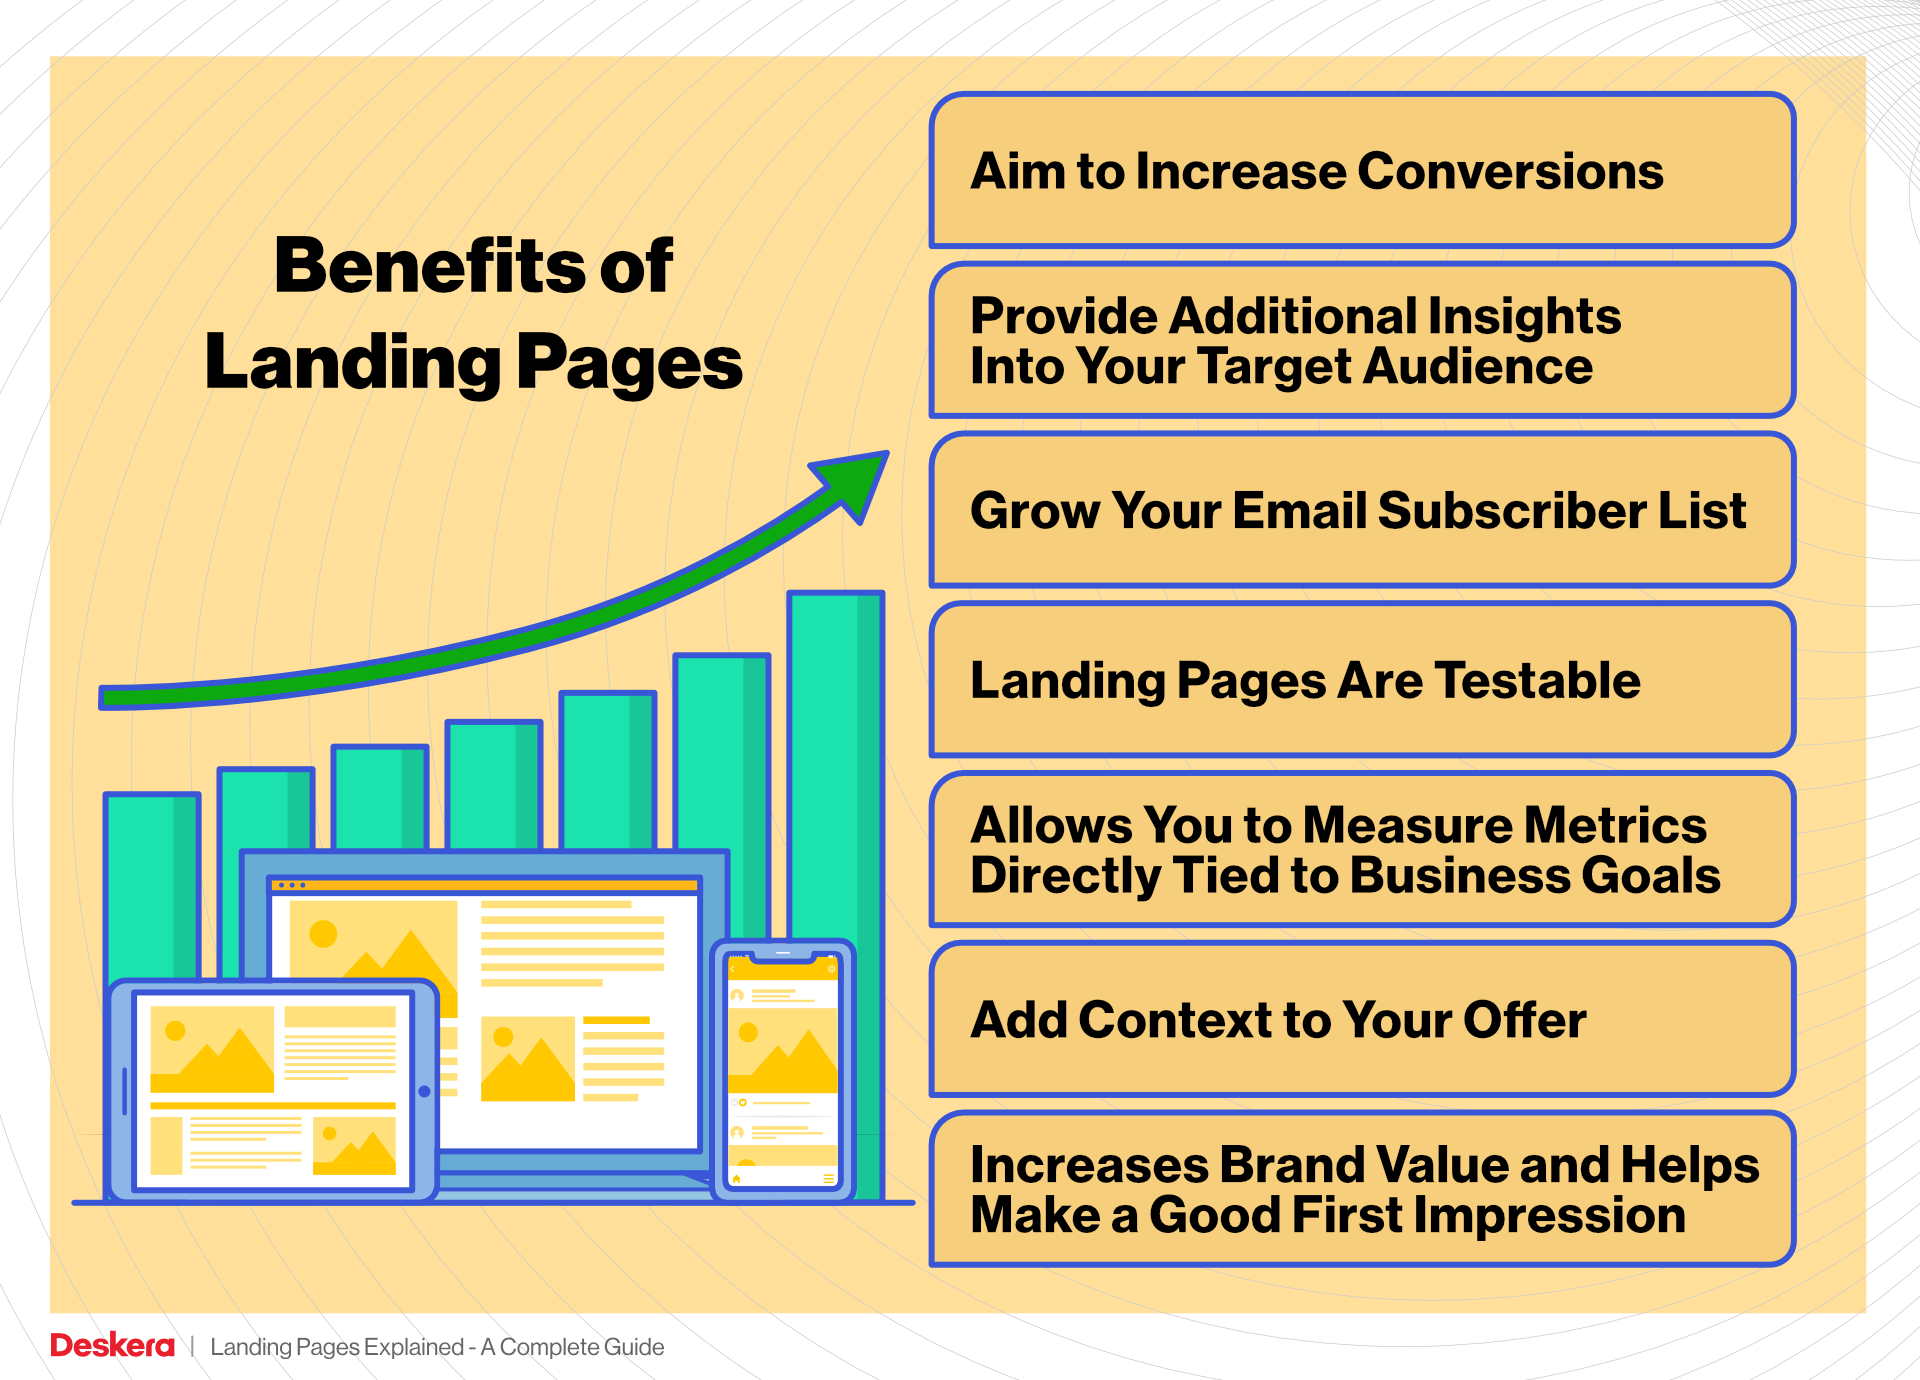 Benefits of Landing Pages